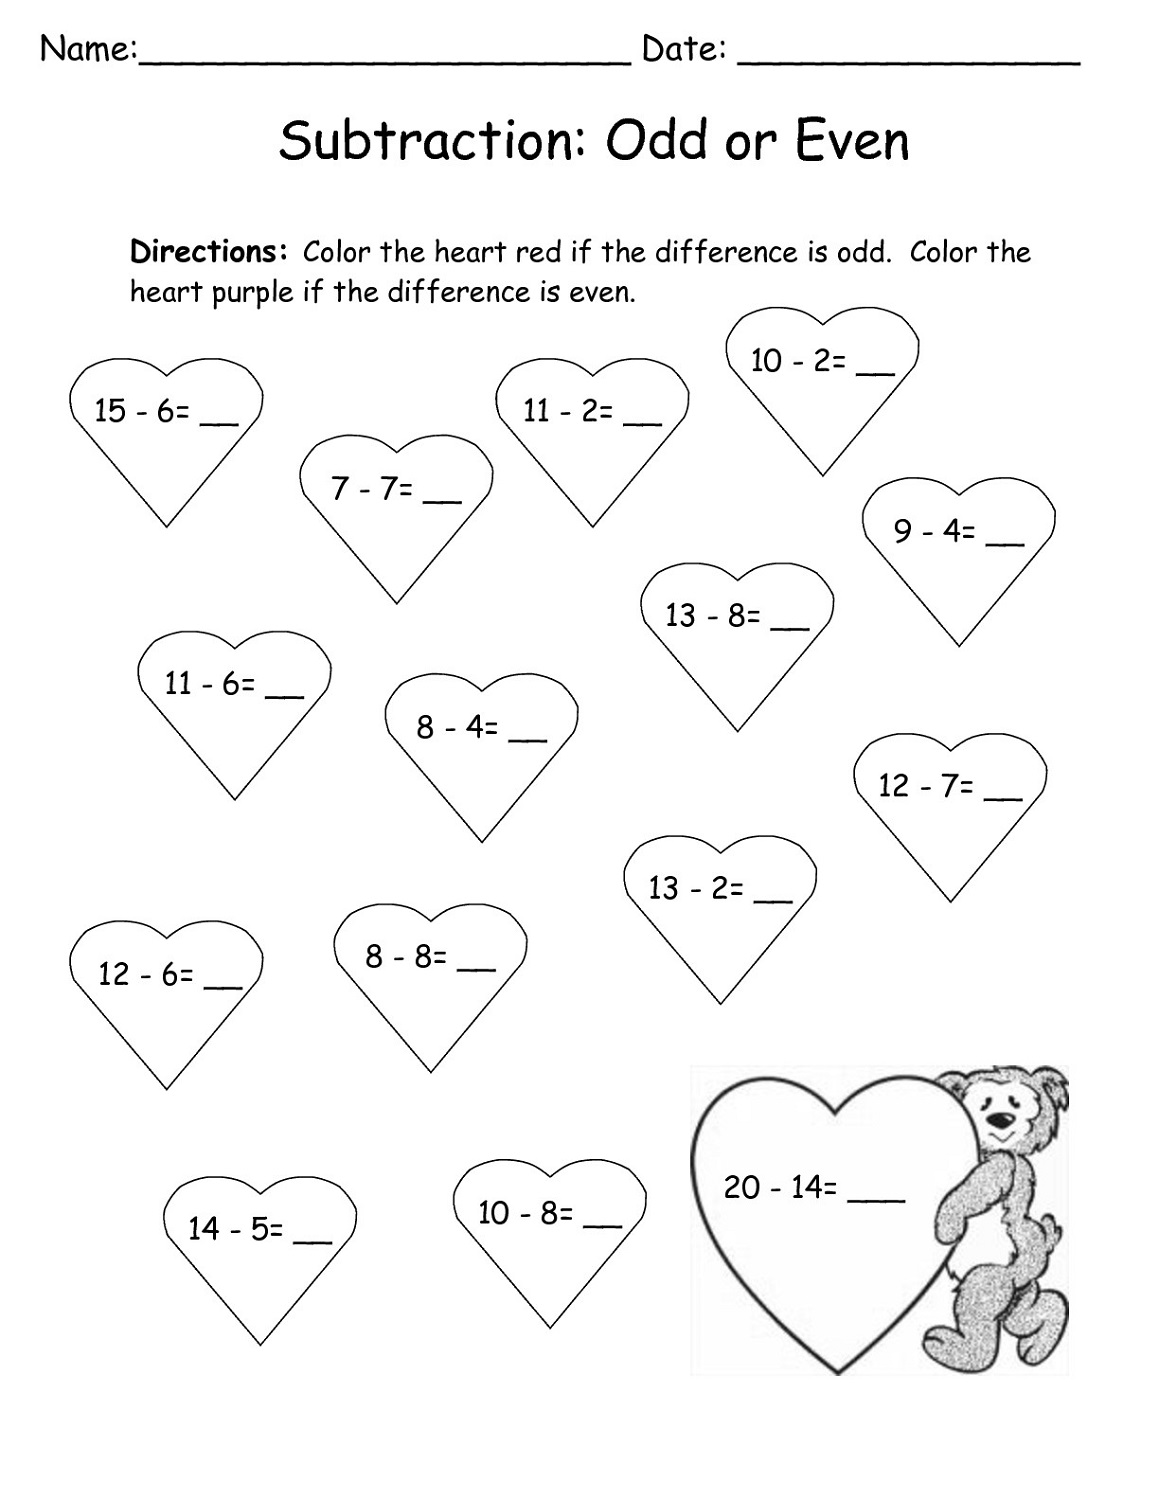 odd-and-even-numbers-worksheets-heart